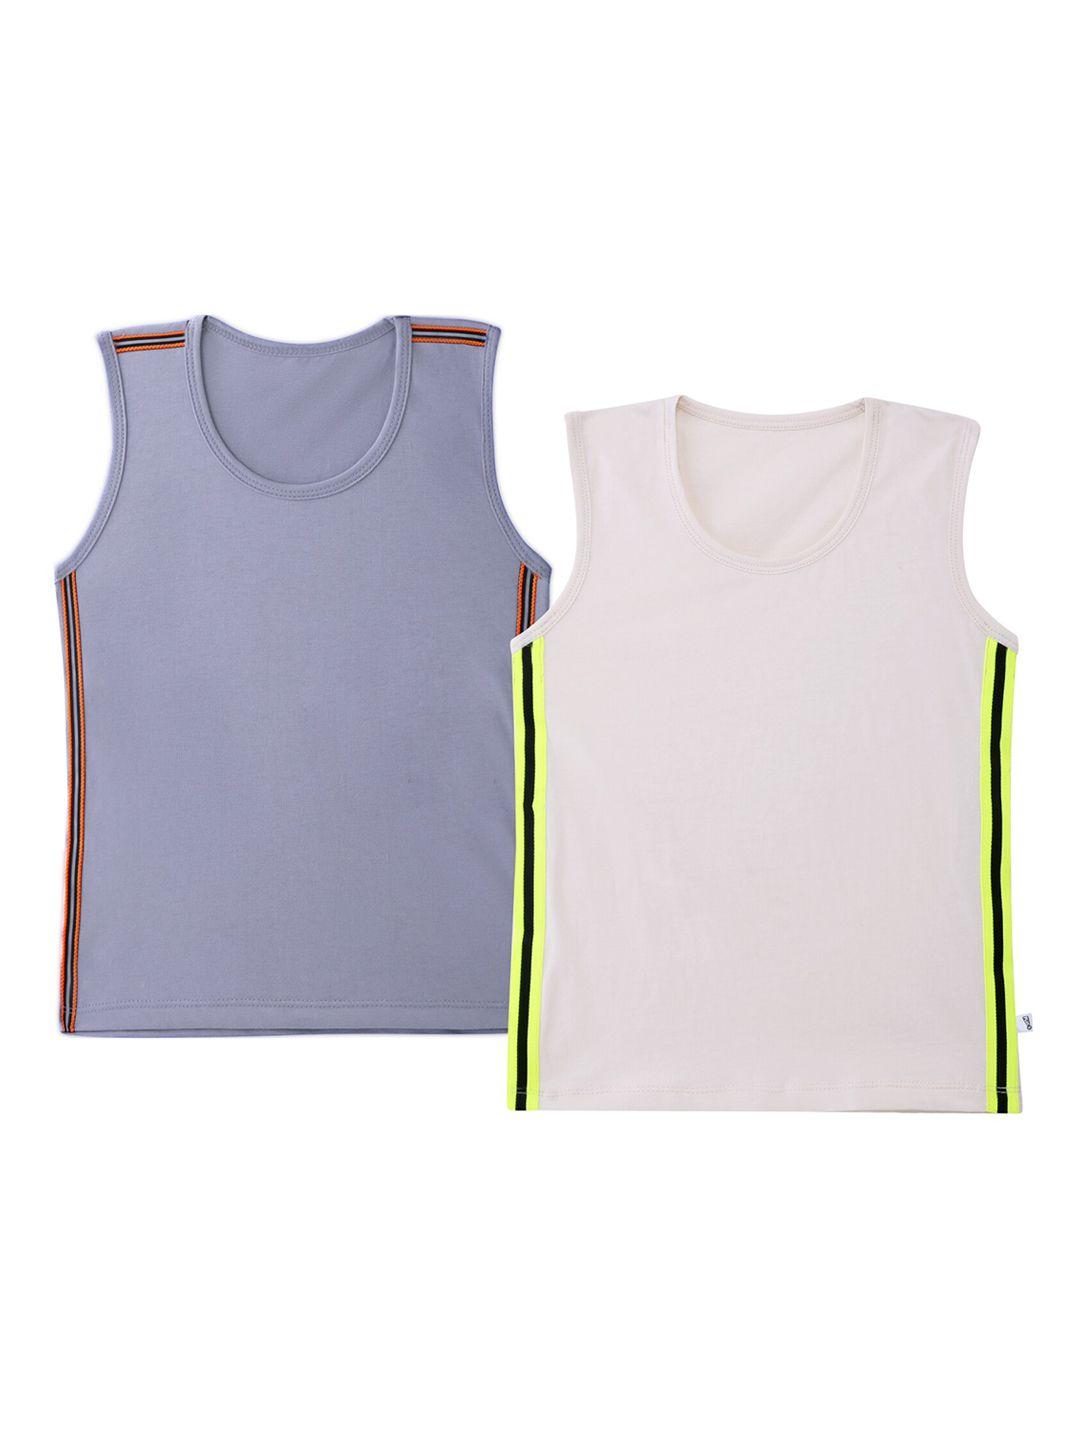 you got plan b boys pack of 2 white & grey solid pure cotton innerwear vests